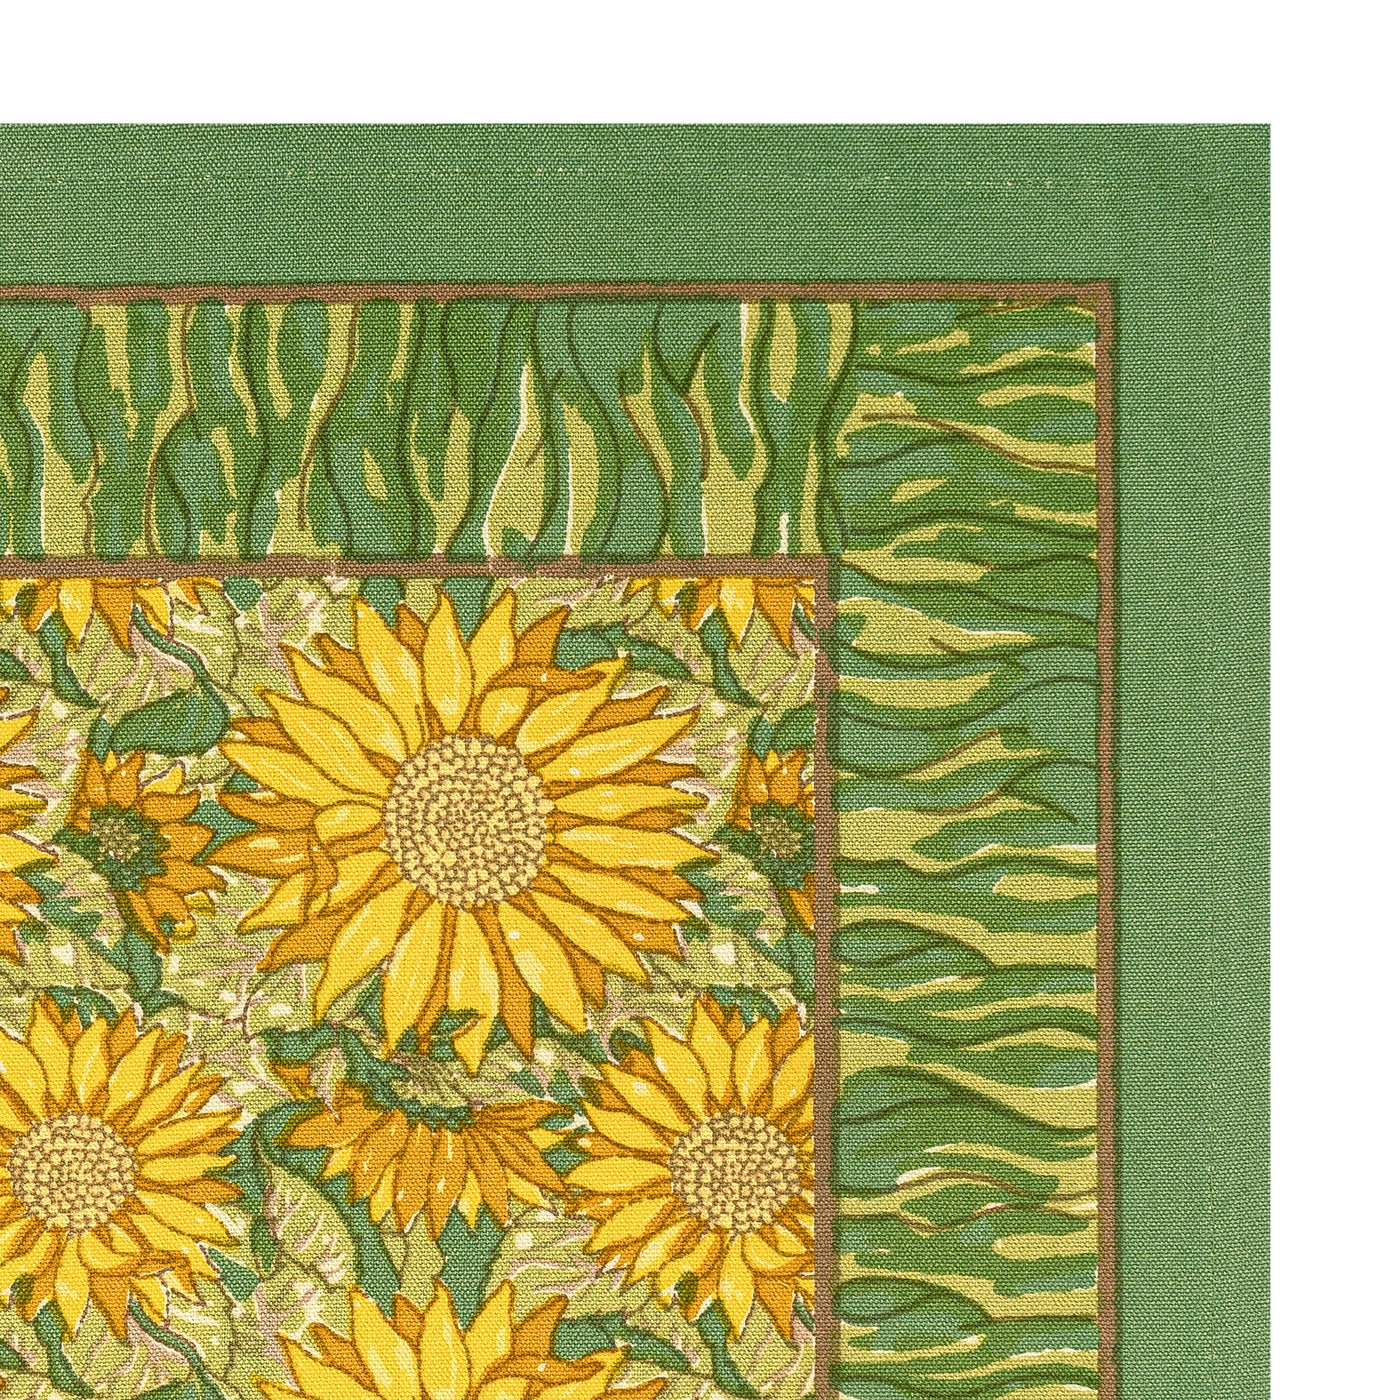 Sunflower Placemats Yellow & Green, Set of 6